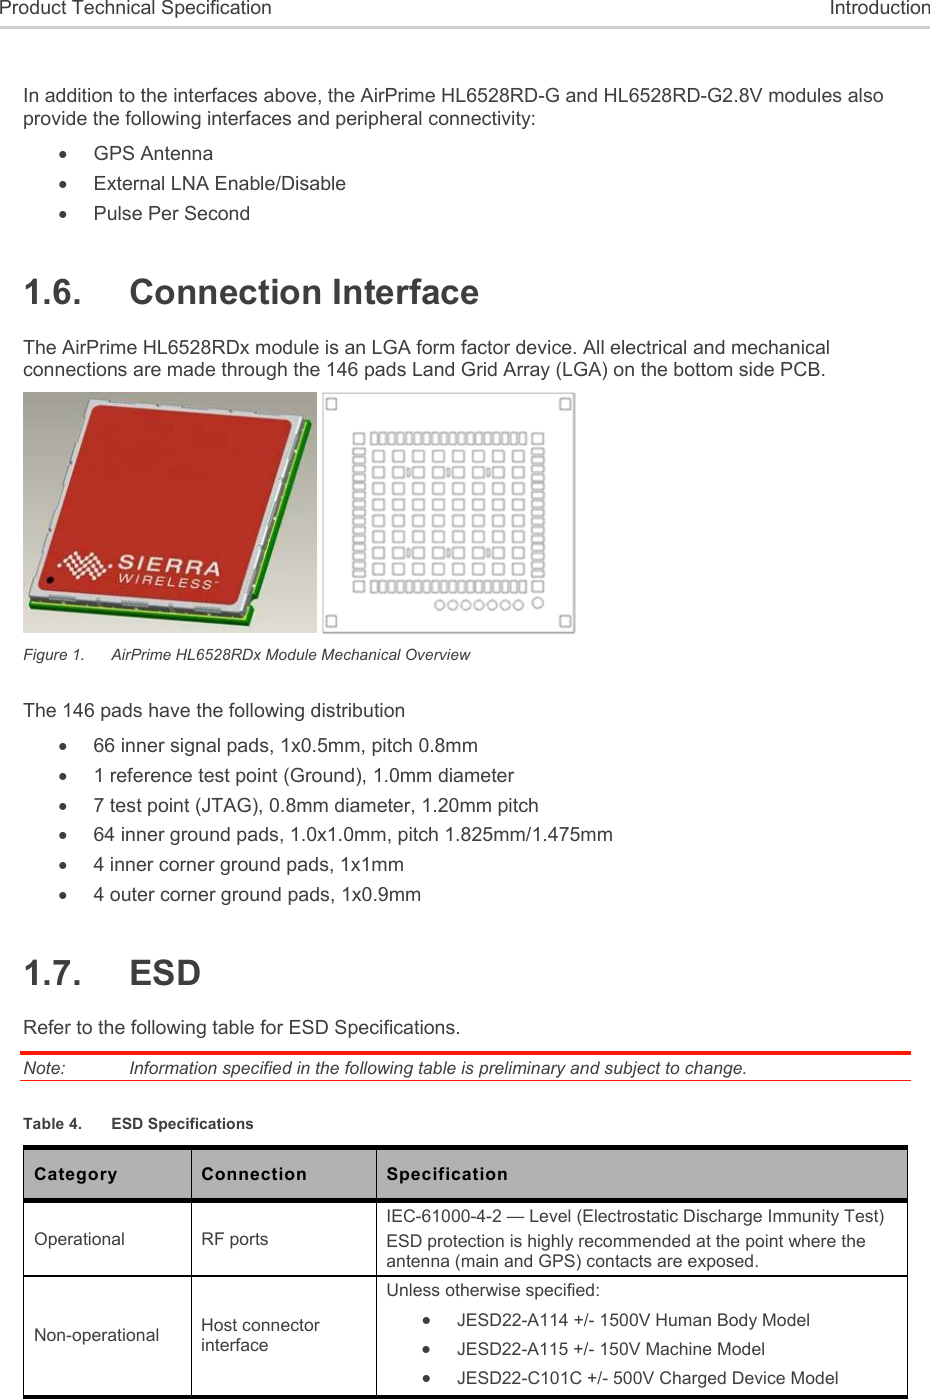  Product Technical Specification  Introduction  In addition to the interfaces above, the AirPrime HL6528RD-G and HL6528RD-G2.8V modules also provide the following interfaces and peripheral connectivity:   GPS Antenna   External LNA Enable/Disable   Pulse Per Second 1.6.  Connection Interface The AirPrime HL6528RDx module is an LGA form factor device. All electrical and mechanical connections are made through the 146 pads Land Grid Array (LGA) on the bottom side PCB.   Figure 1.  AirPrime HL6528RDx Module Mechanical Overview The 146 pads have the following distribution    66 inner signal pads, 1x0.5mm, pitch 0.8mm   1 reference test point (Ground), 1.0mm diameter   7 test point (JTAG), 0.8mm diameter, 1.20mm pitch   64 inner ground pads, 1.0x1.0mm, pitch 1.825mm/1.475mm   4 inner corner ground pads, 1x1mm   4 outer corner ground pads, 1x0.9mm 1.7.  ESD Refer to the following table for ESD Specifications. Note:   Information specified in the following table is preliminary and subject to change. Table 4.  ESD Specifications Category  Connection  Specification Operational  RF ports IEC-61000-4-2 — Level (Electrostatic Discharge Immunity Test) ESD protection is highly recommended at the point where the antenna (main and GPS) contacts are exposed. Non-operational  Host connector interface Unless otherwise specified:  JESD22-A114 +/- 1500V Human Body Model  JESD22-A115 +/- 150V Machine Model  JESD22-C101C +/- 500V Charged Device Model 